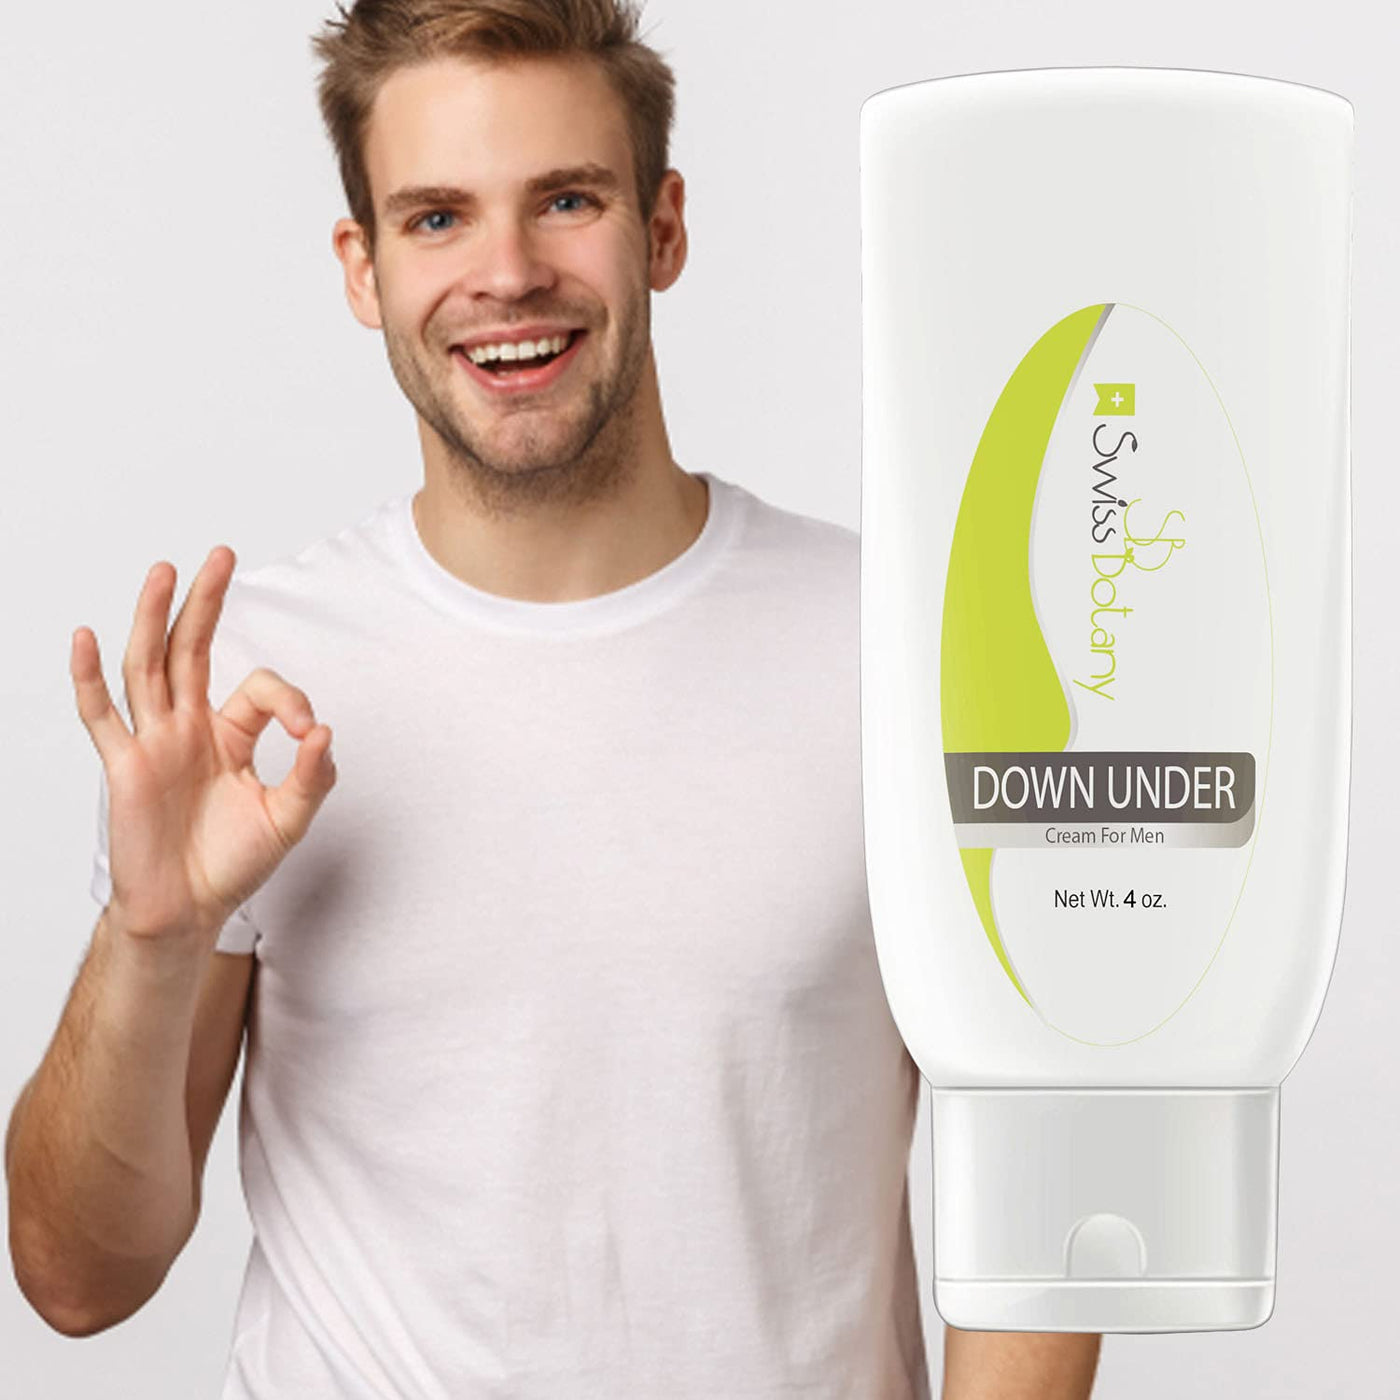 Swiss Botany health and hygiene Swiss Botany Down Under Cream for Men with L-Arginine for the Sensitive Skin of Private Areas, Moisturizes & Soothes Irritated and Chapped Skin, Safe for All Skin Types, 4 ounces